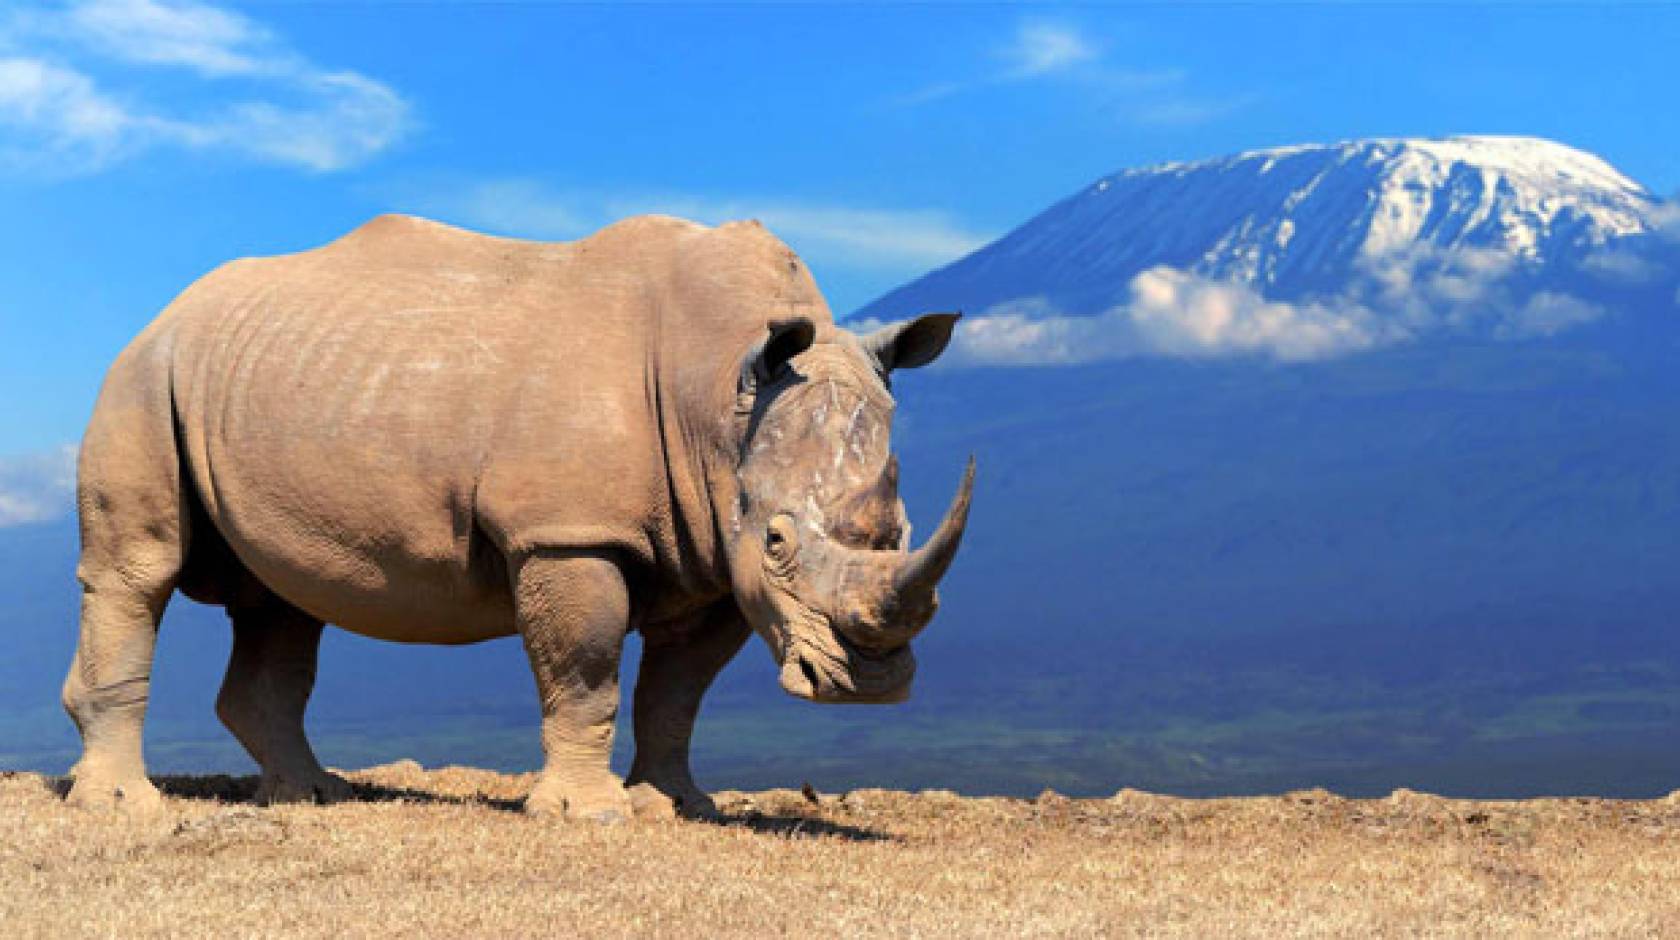 Rhino on a cliff with mountain background behind